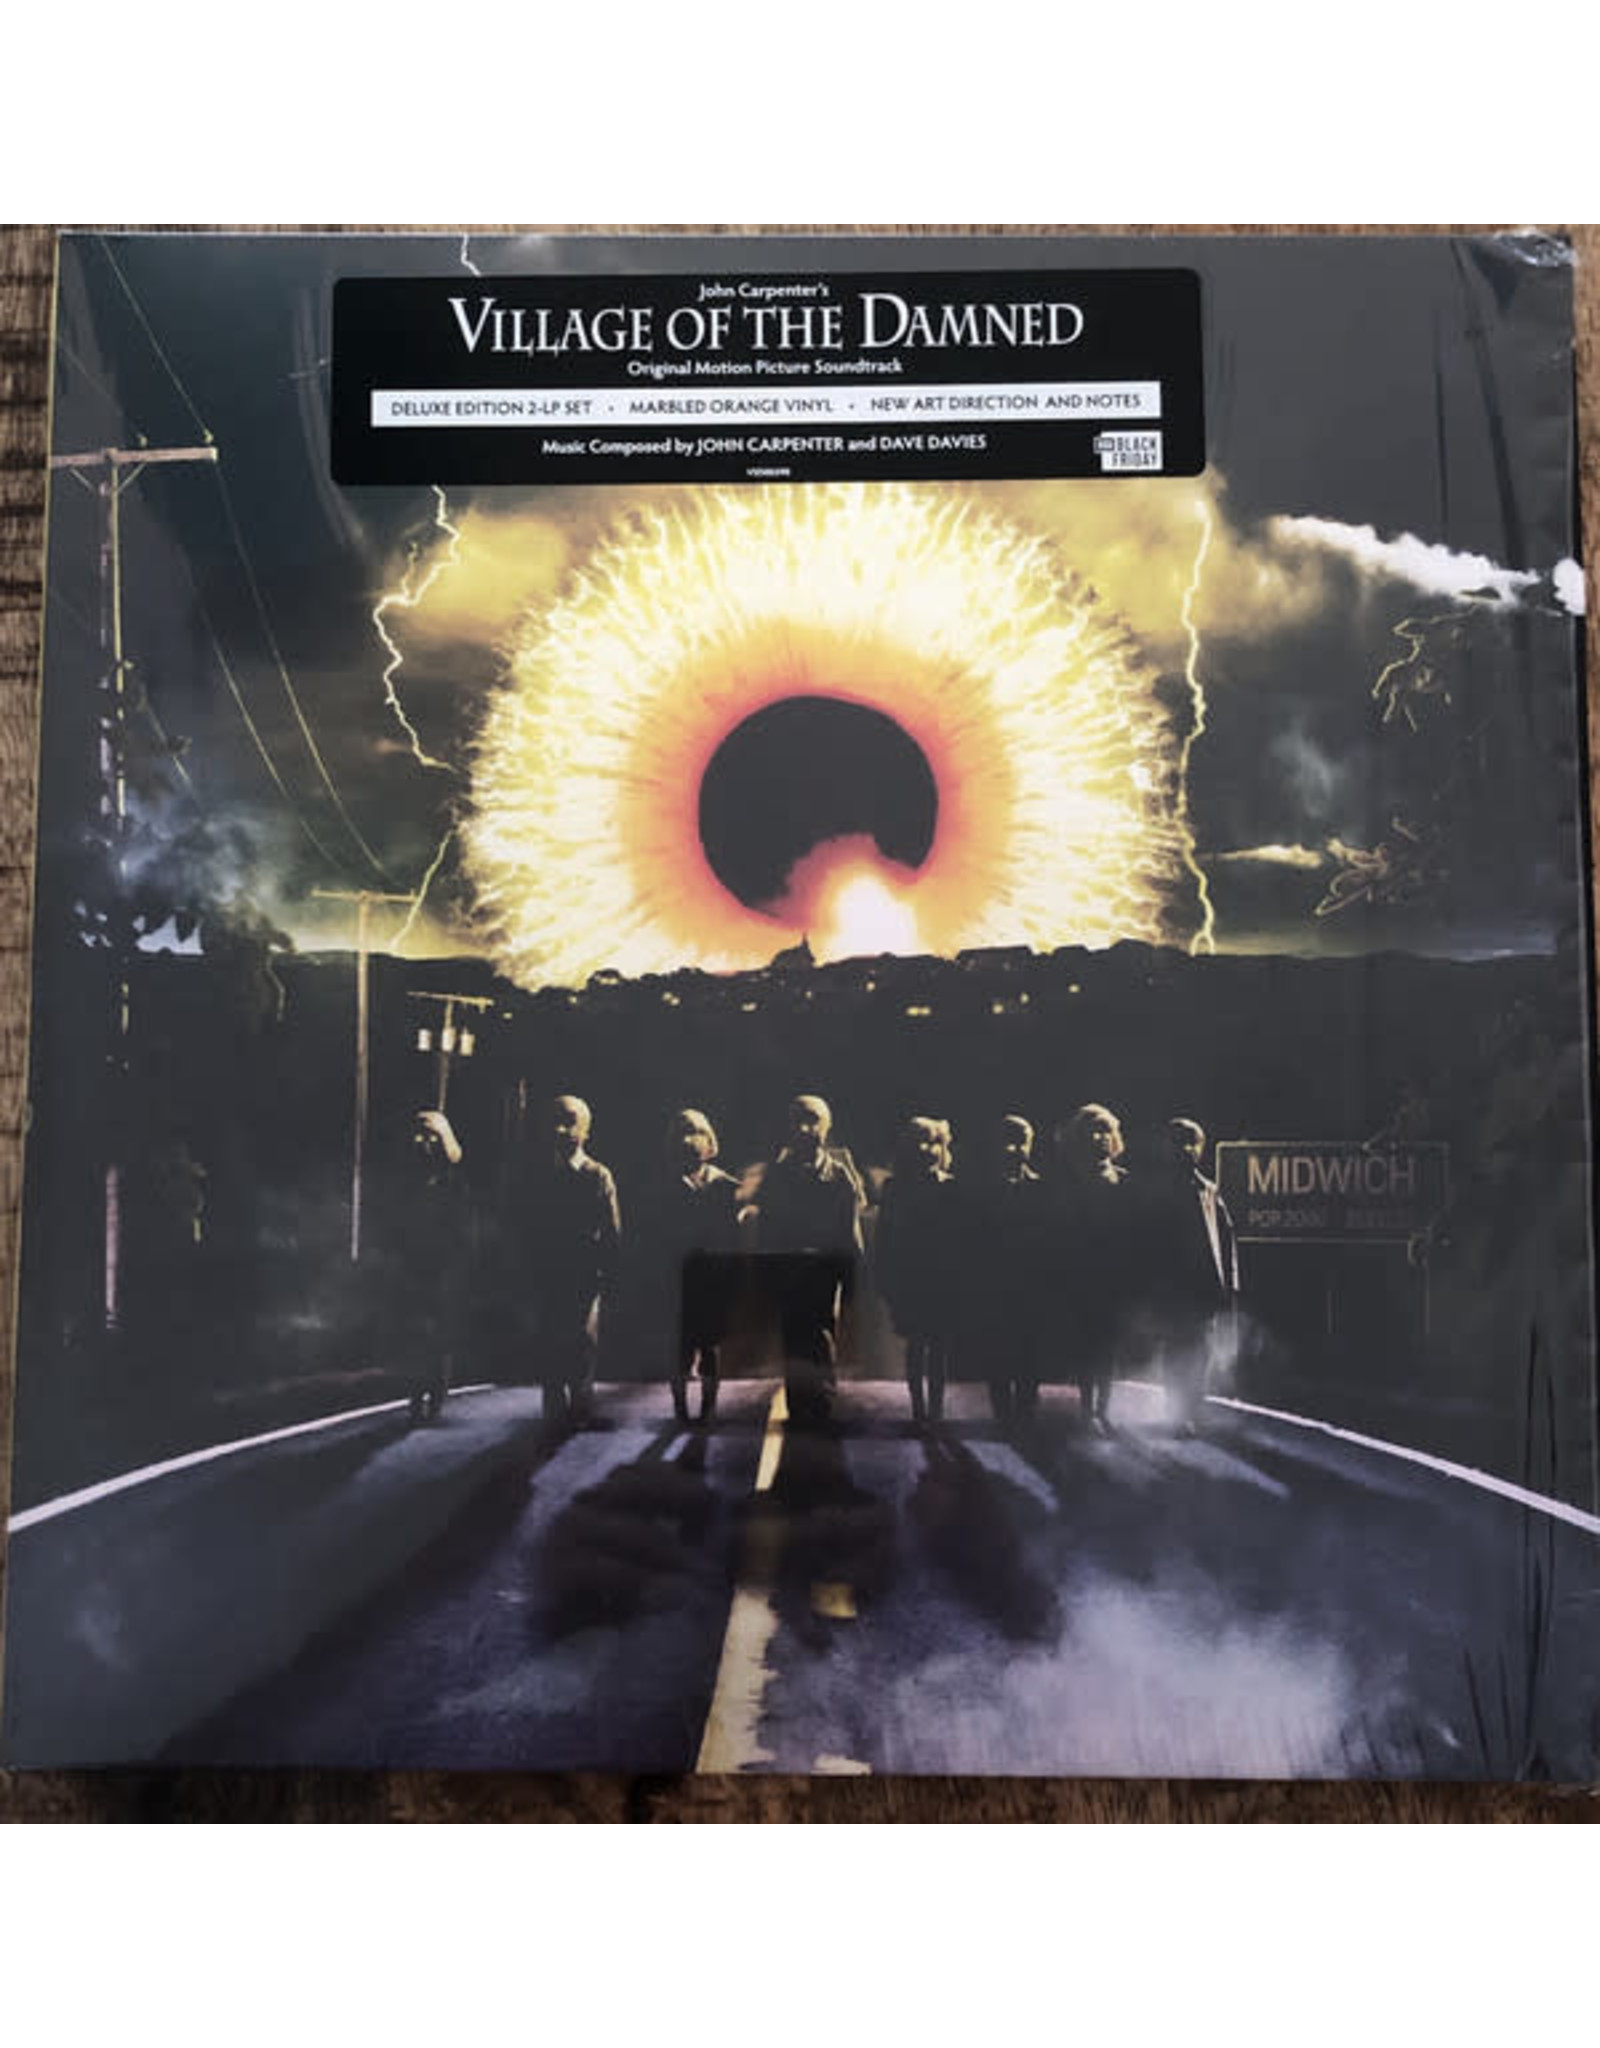 OST -John Carpenter's Village of the Damned LP (RSD '21 Exclusive)